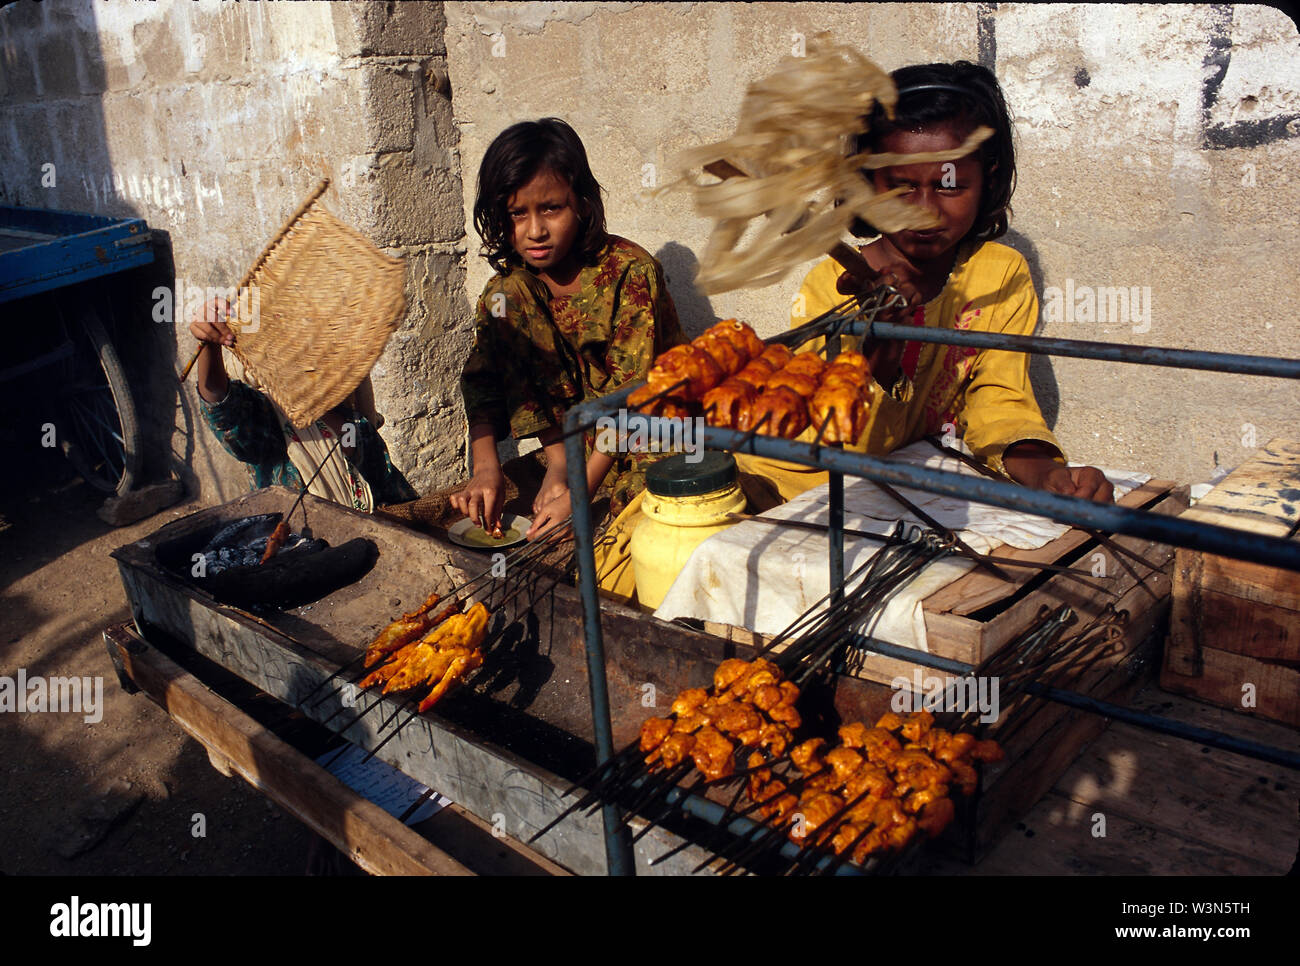 Bengali children selling barbecued meat, in Zia-ul-Haq Colony, a neighborhood where lot of illegal Bengali immigrants live. Karachi. Pakistan. Stock Photo